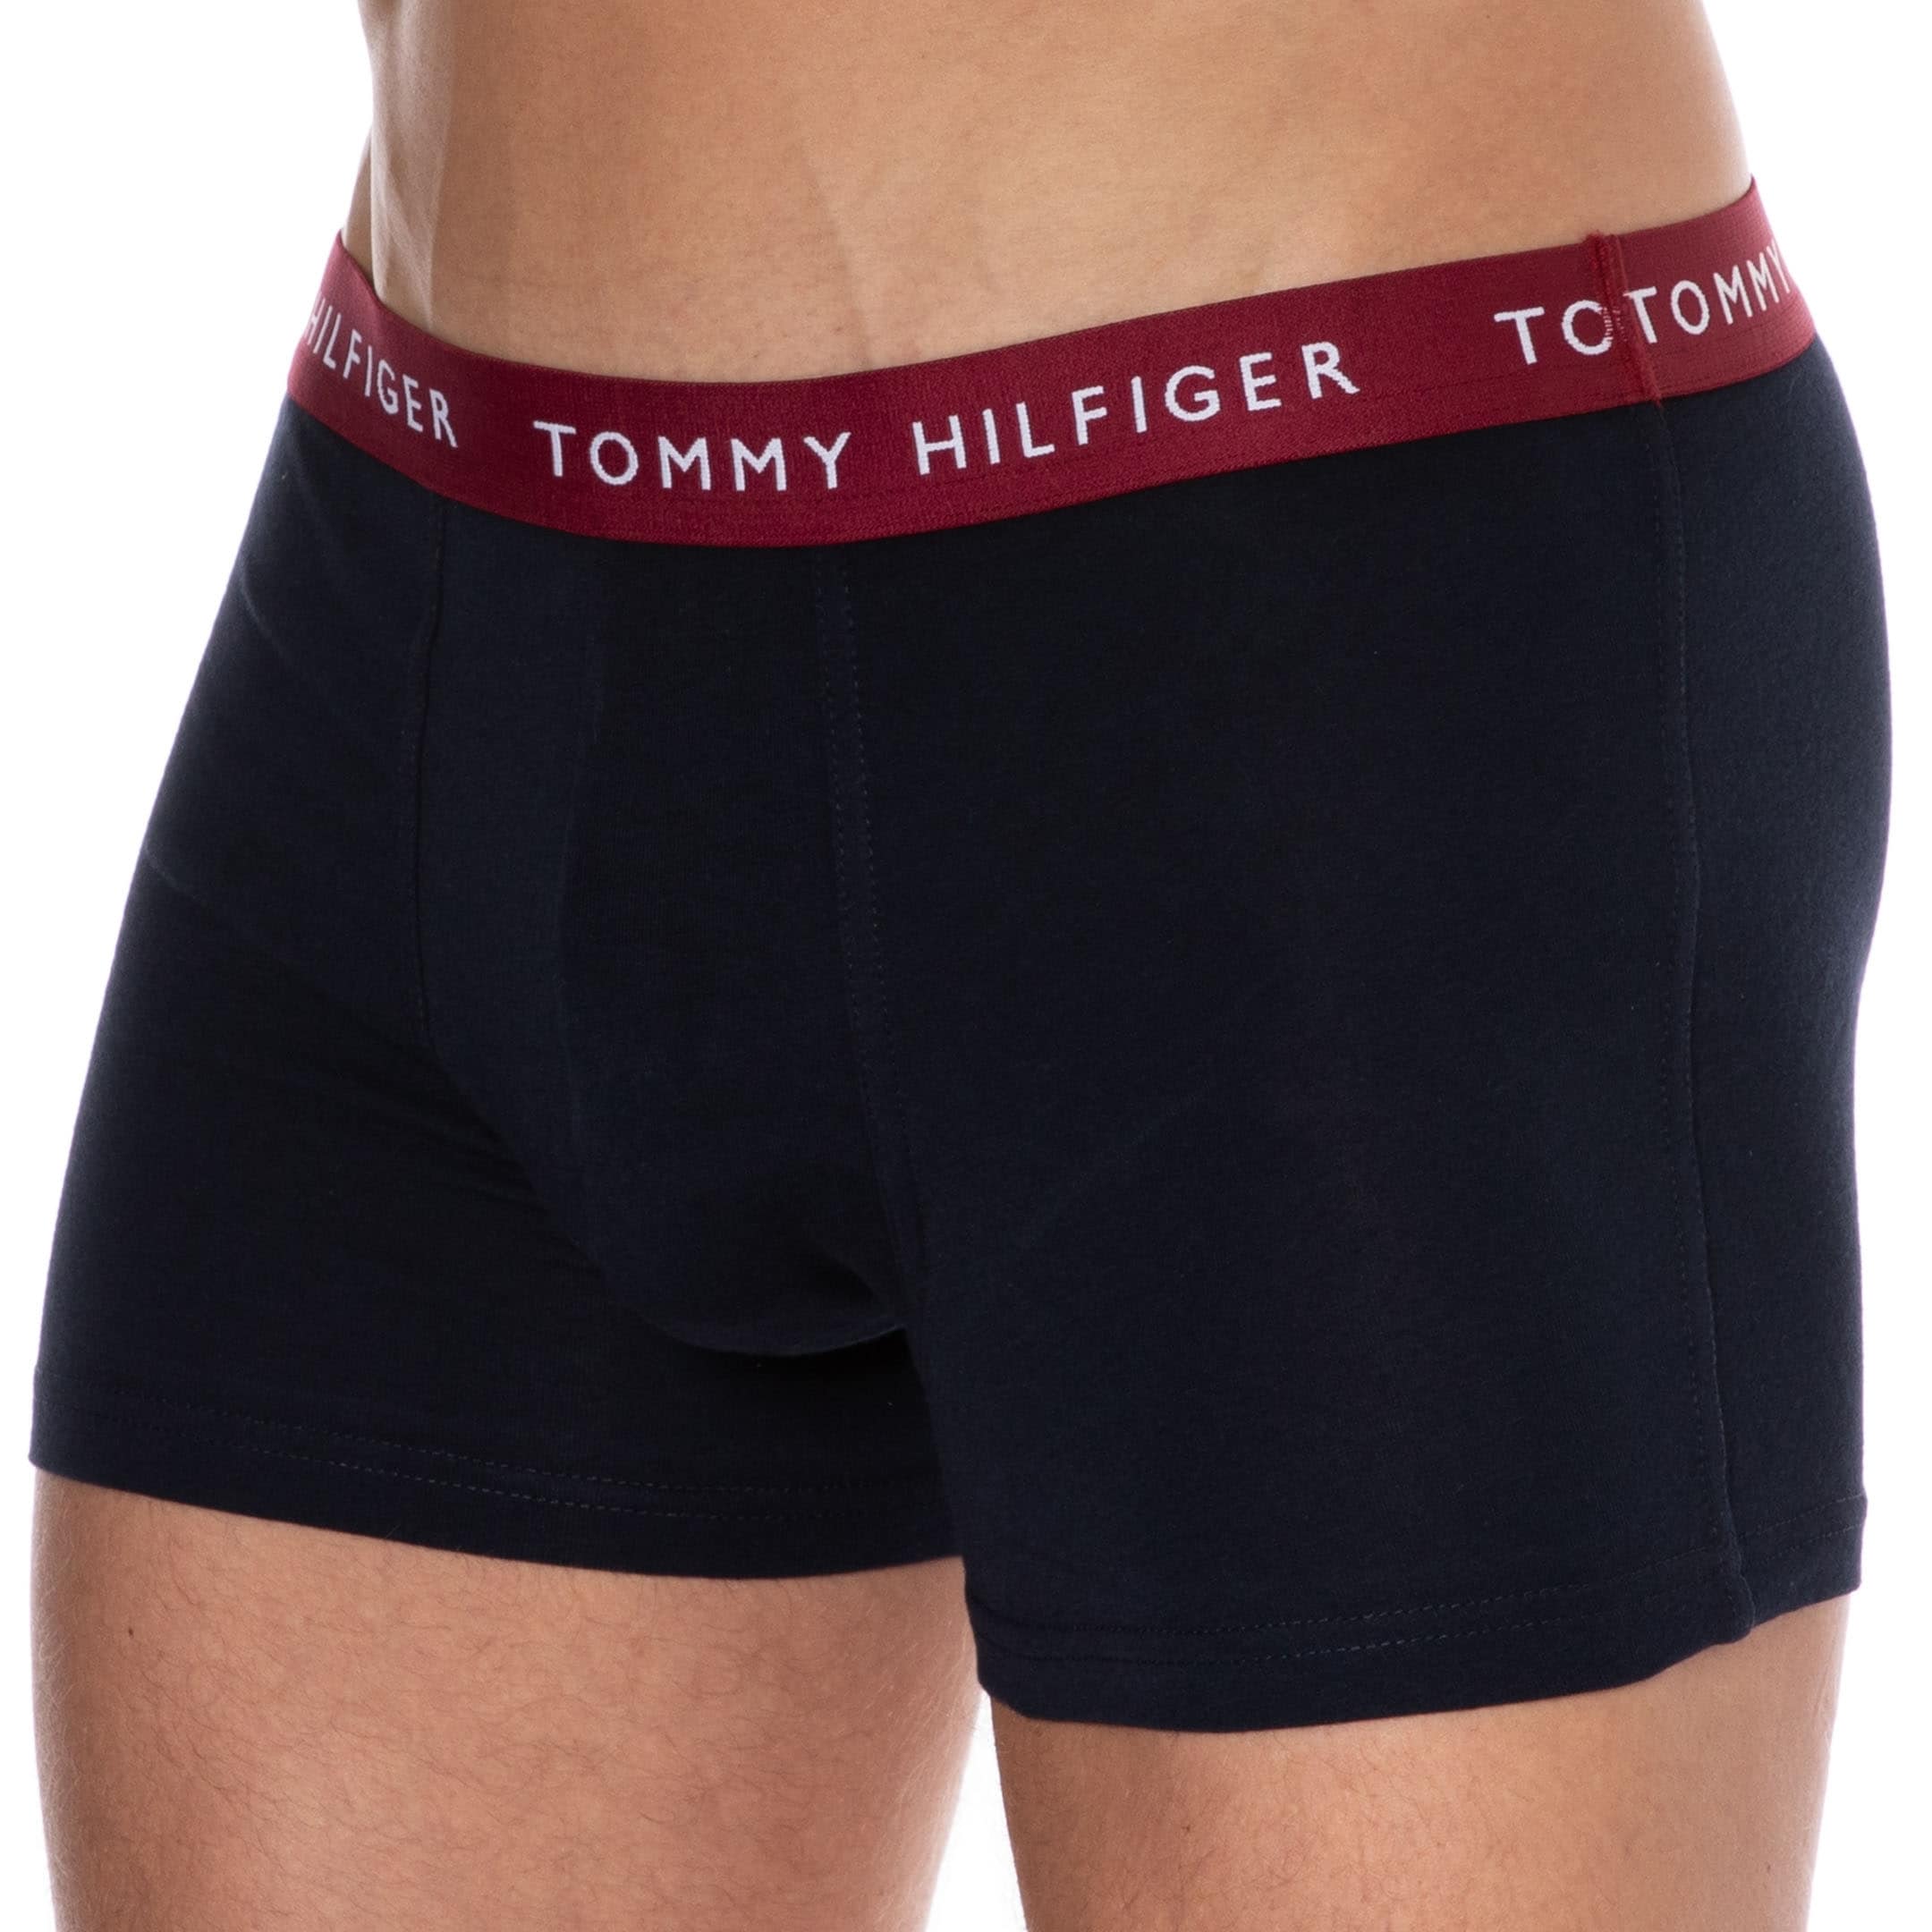 Tommy Hilfiger Men's Recycled Cotton Trunks 3-Pack - Blazer Red